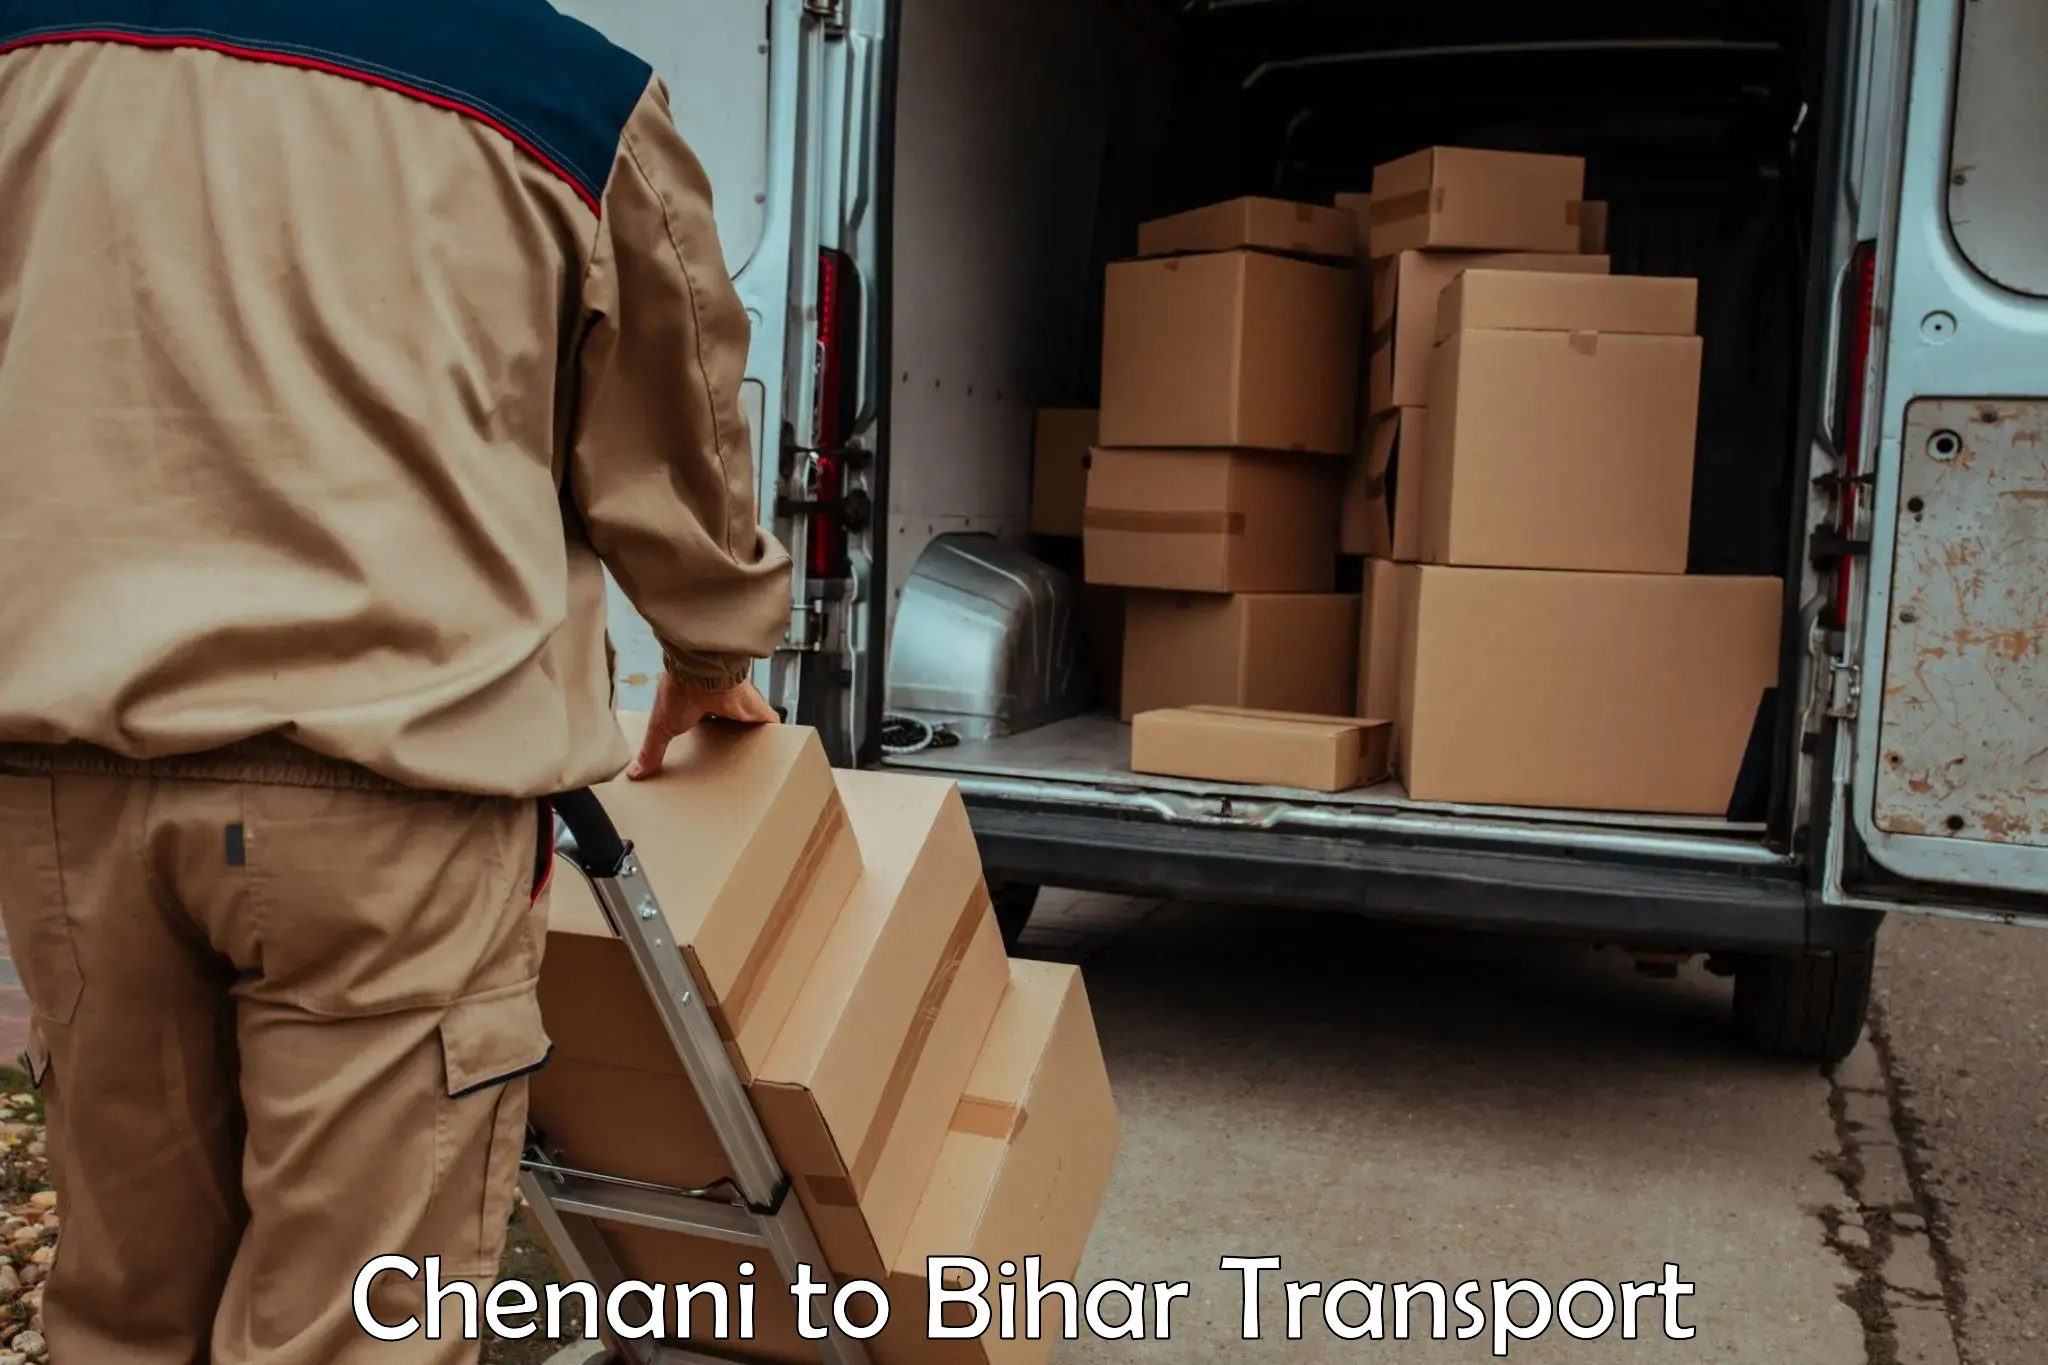 Truck transport companies in India Chenani to Buxar